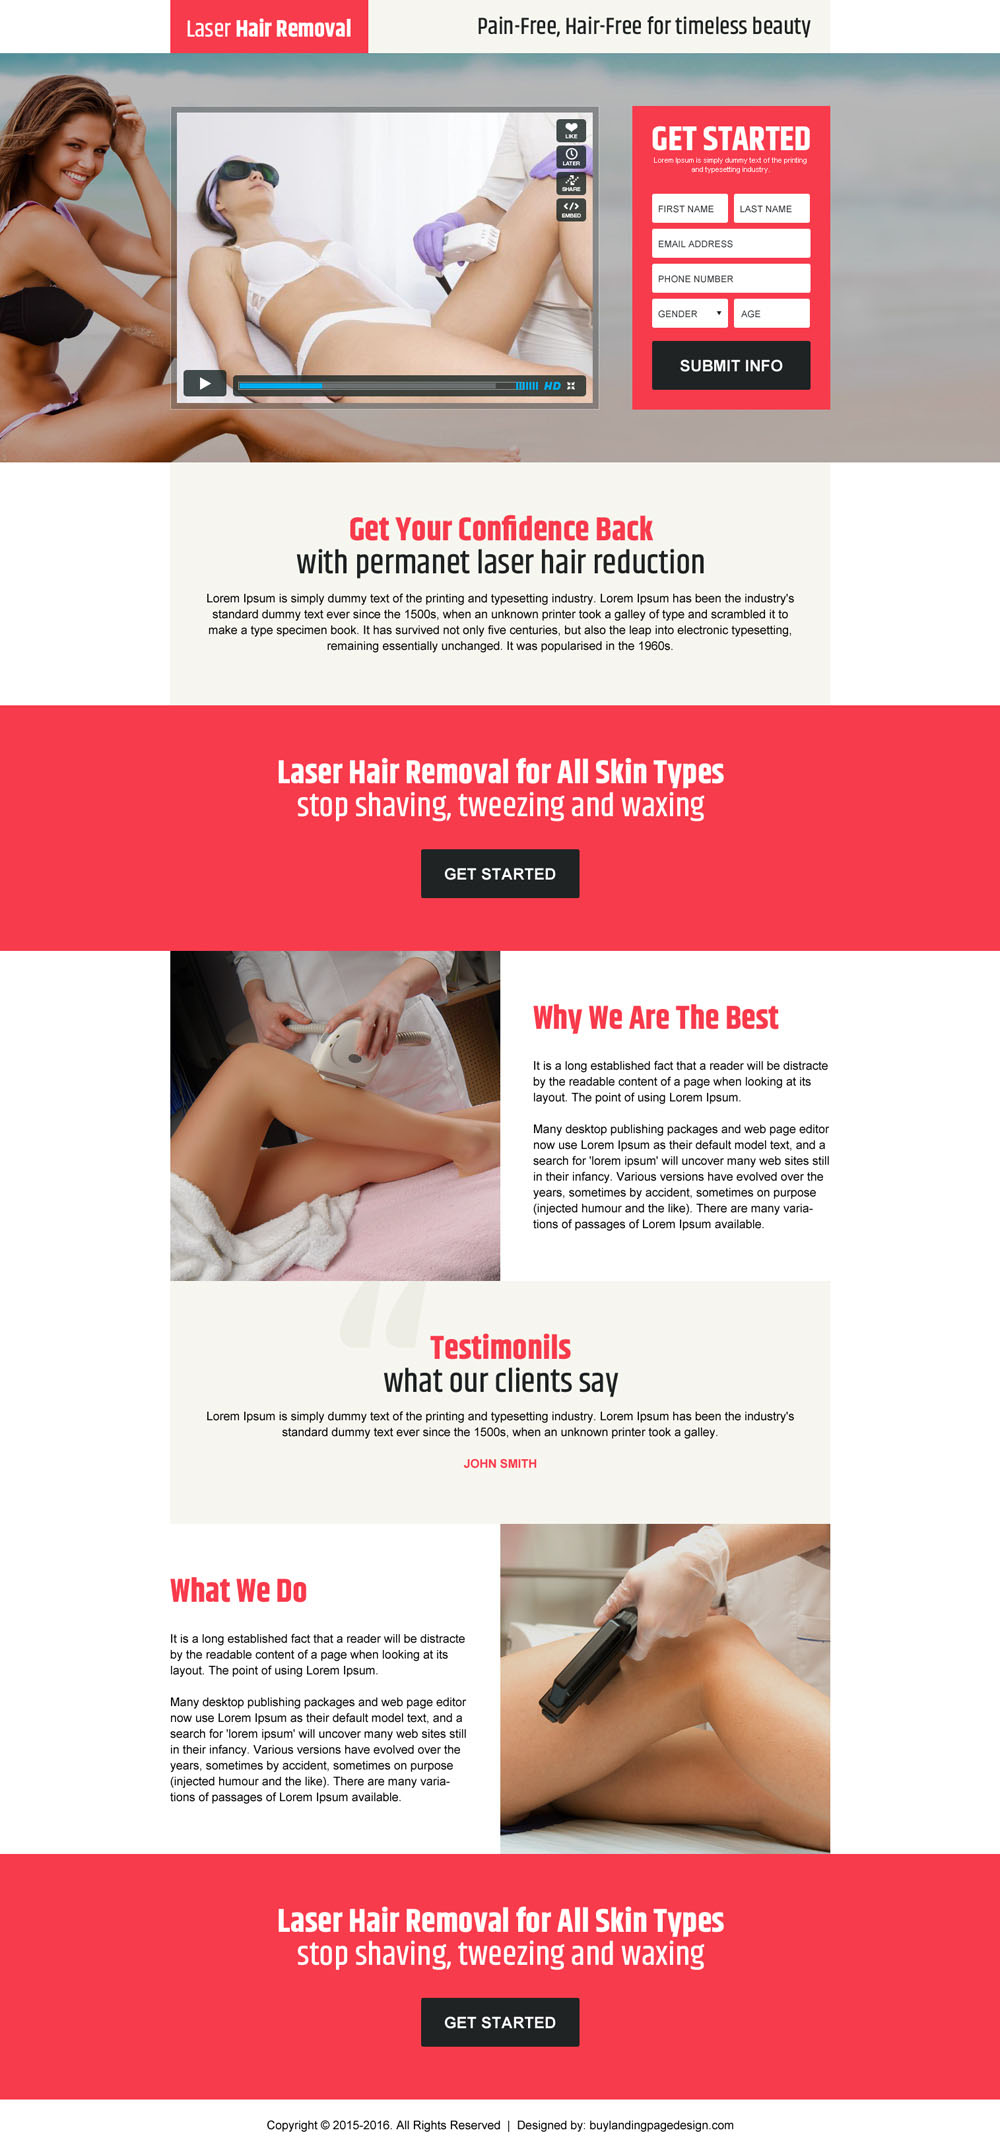 laser-hair-removal-pain-free-lead-capture-video-landing-page-design-003